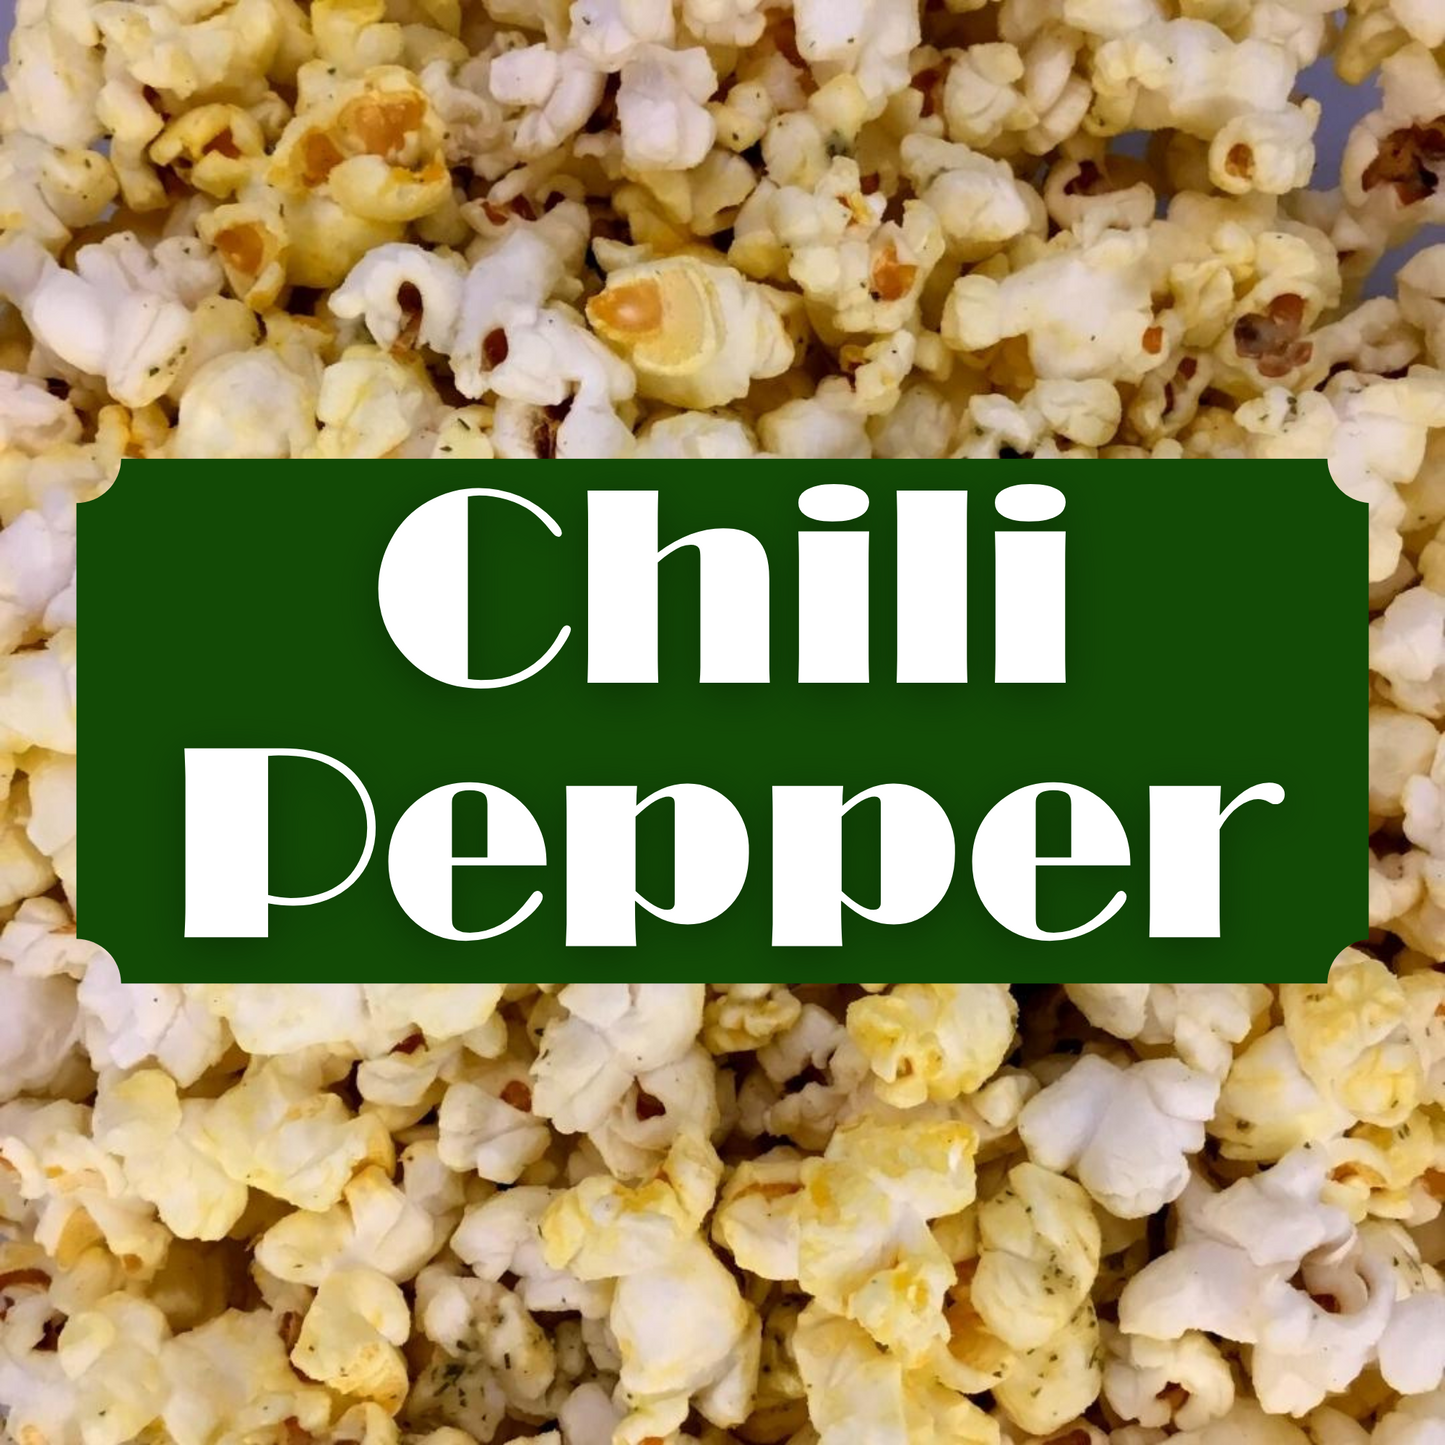 Chili Pepper Popcorn Large Bags - Case of 8 ($2.99ea)